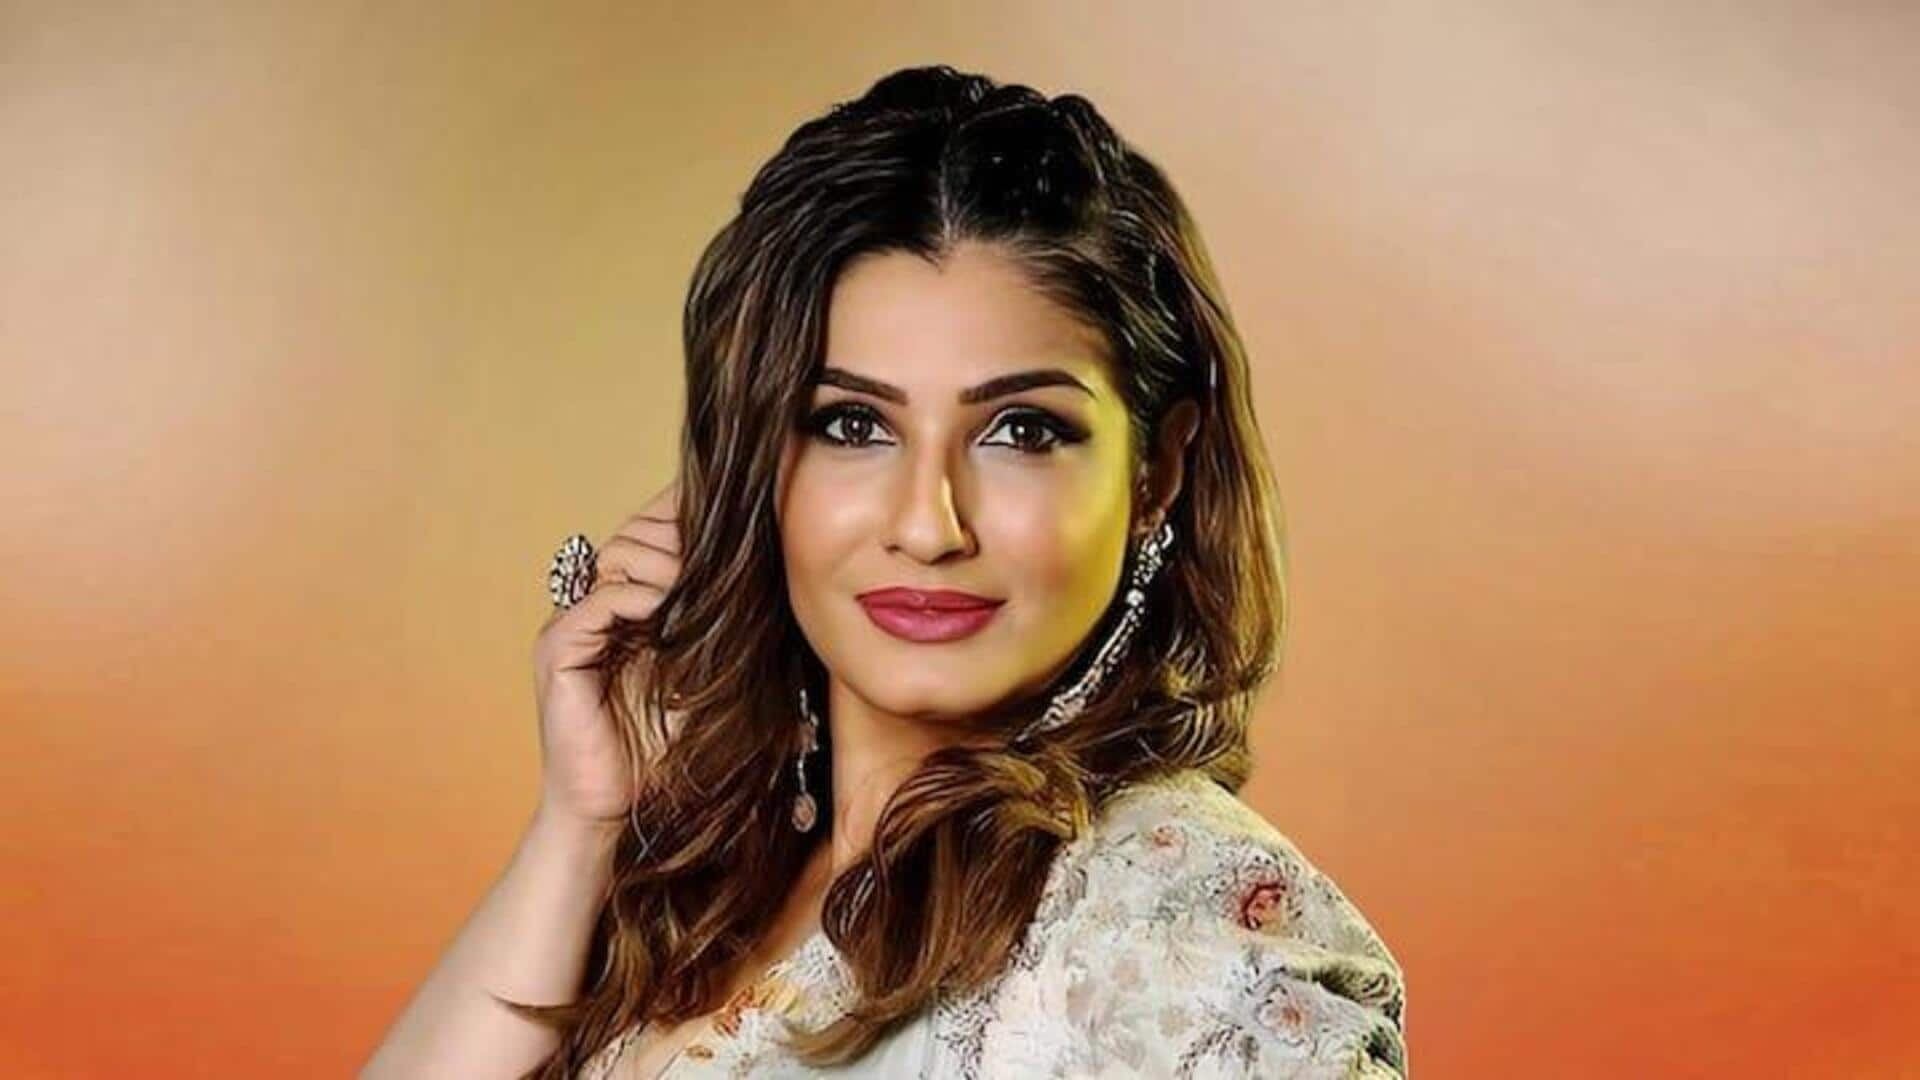 Raveena Tandon 'in shock' after being attacked by mob: Report